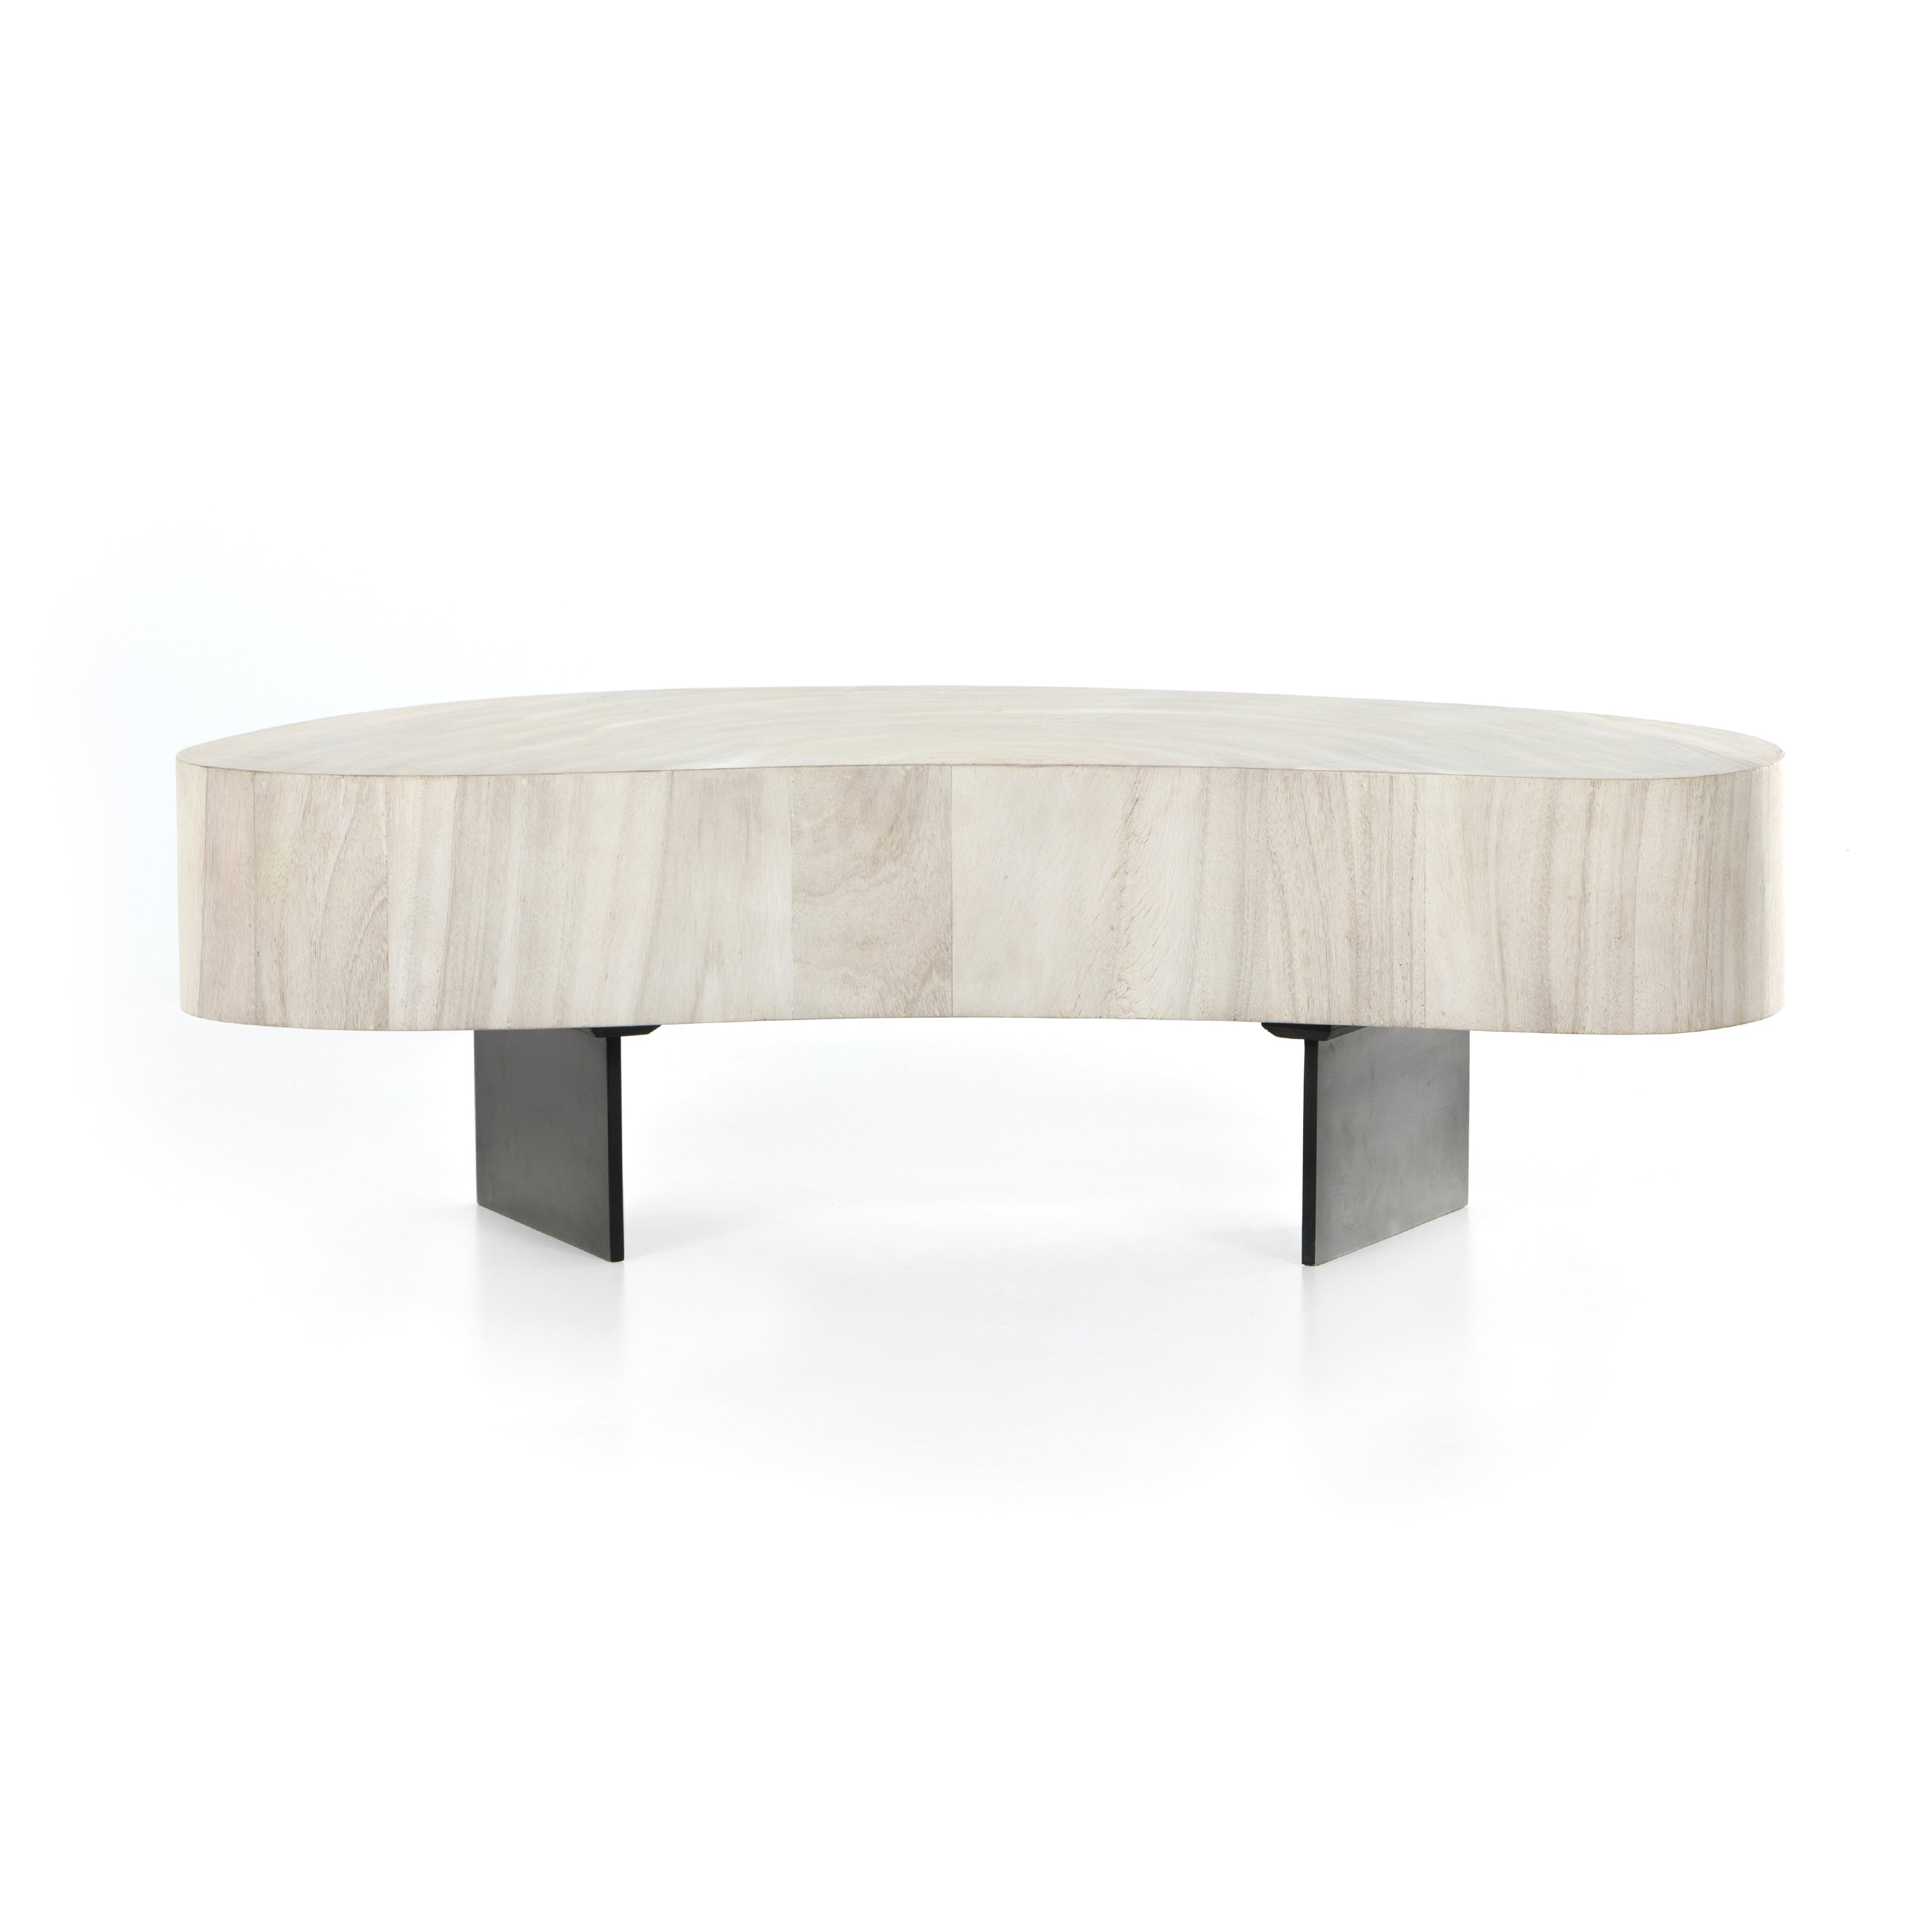 Natural beauty - total novelty. A thick slab of bleached, oyster-cut Guanacaste forms a tall, kidney-shaped coffee table. Visible rings speak to woods' natural graining, while a dark gunmetal-finished base provides clean contrast to the whole look. Amethyst Home provides interior design, new construction, custom furniture, and area rugs in the Nashville metro area.